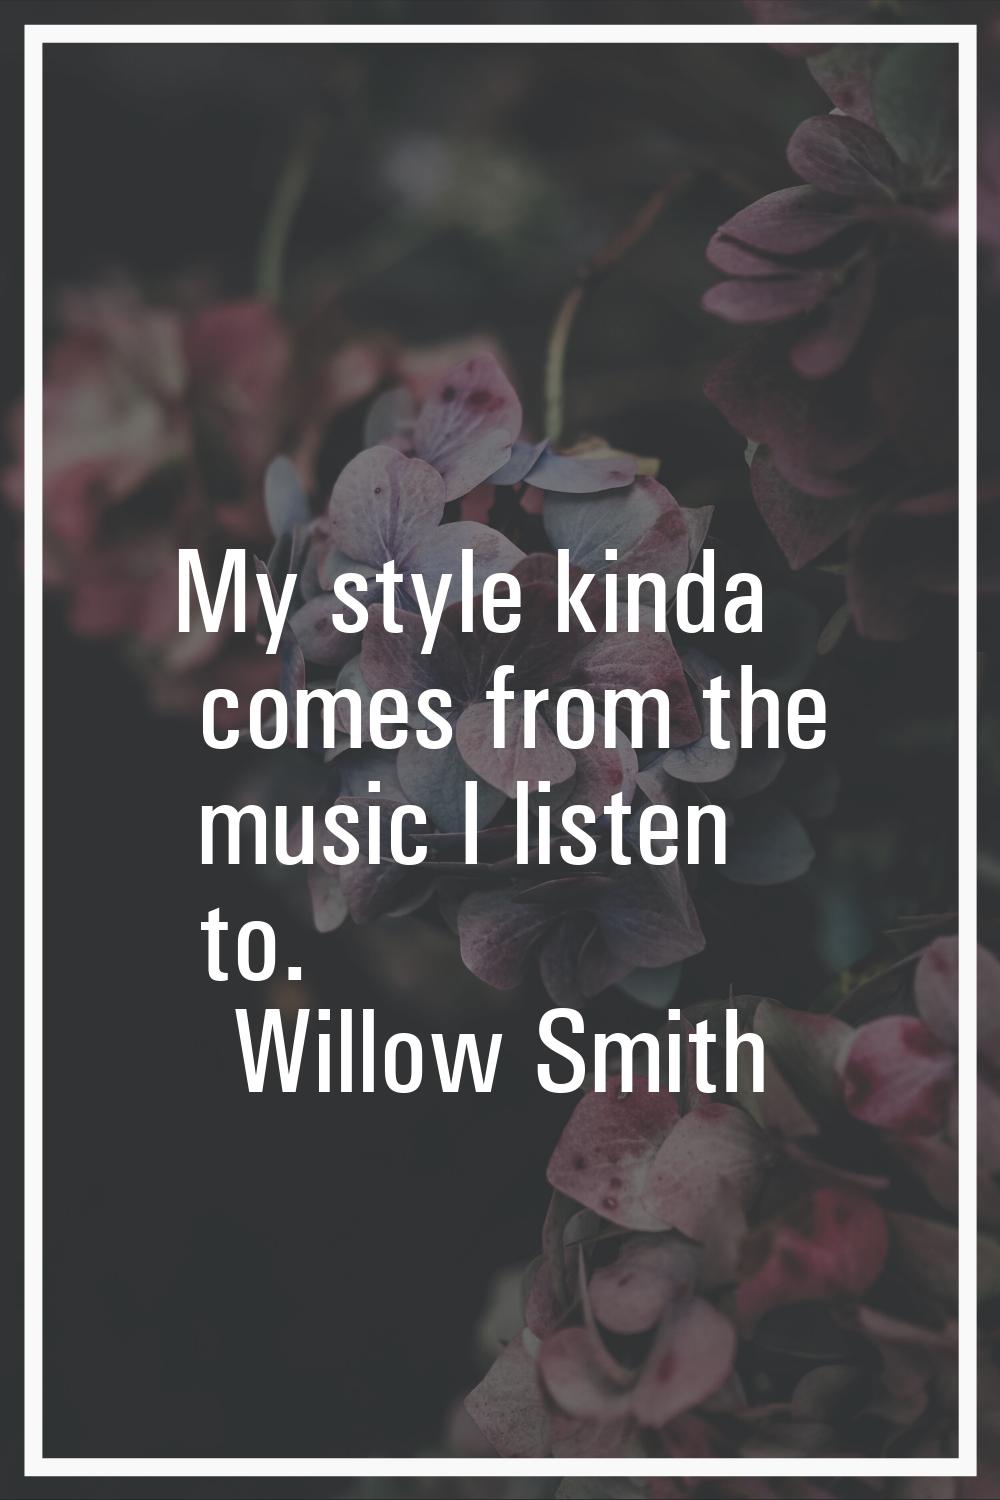 My style kinda comes from the music I listen to.